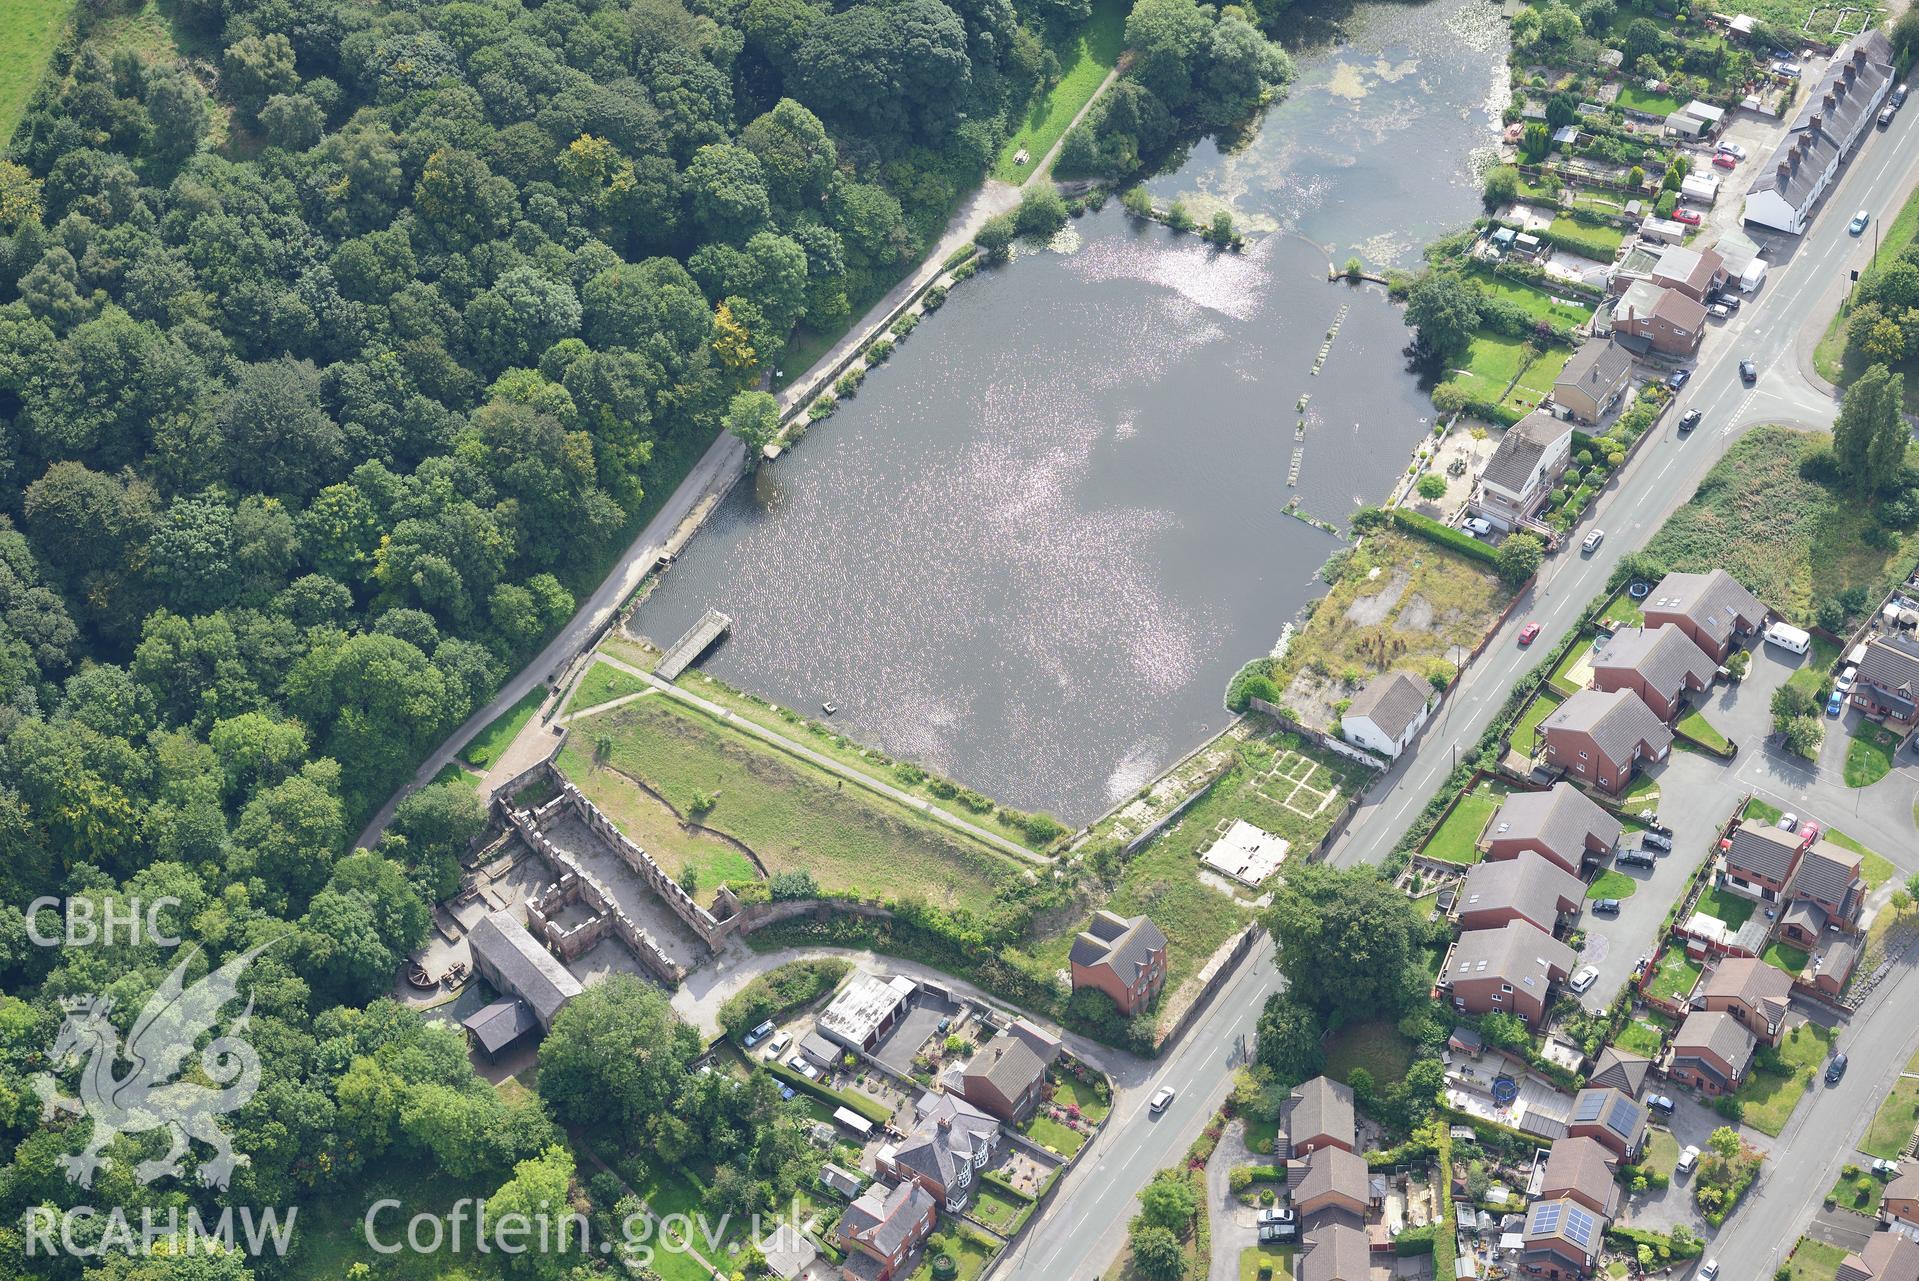 Lower Cotton Mill, Greenfield Valley Heritage Park, Holywell. Oblique aerial photograph taken during the Royal Commission's programme of archaeological aerial reconnaissance by Toby Driver on 11th September 2015.